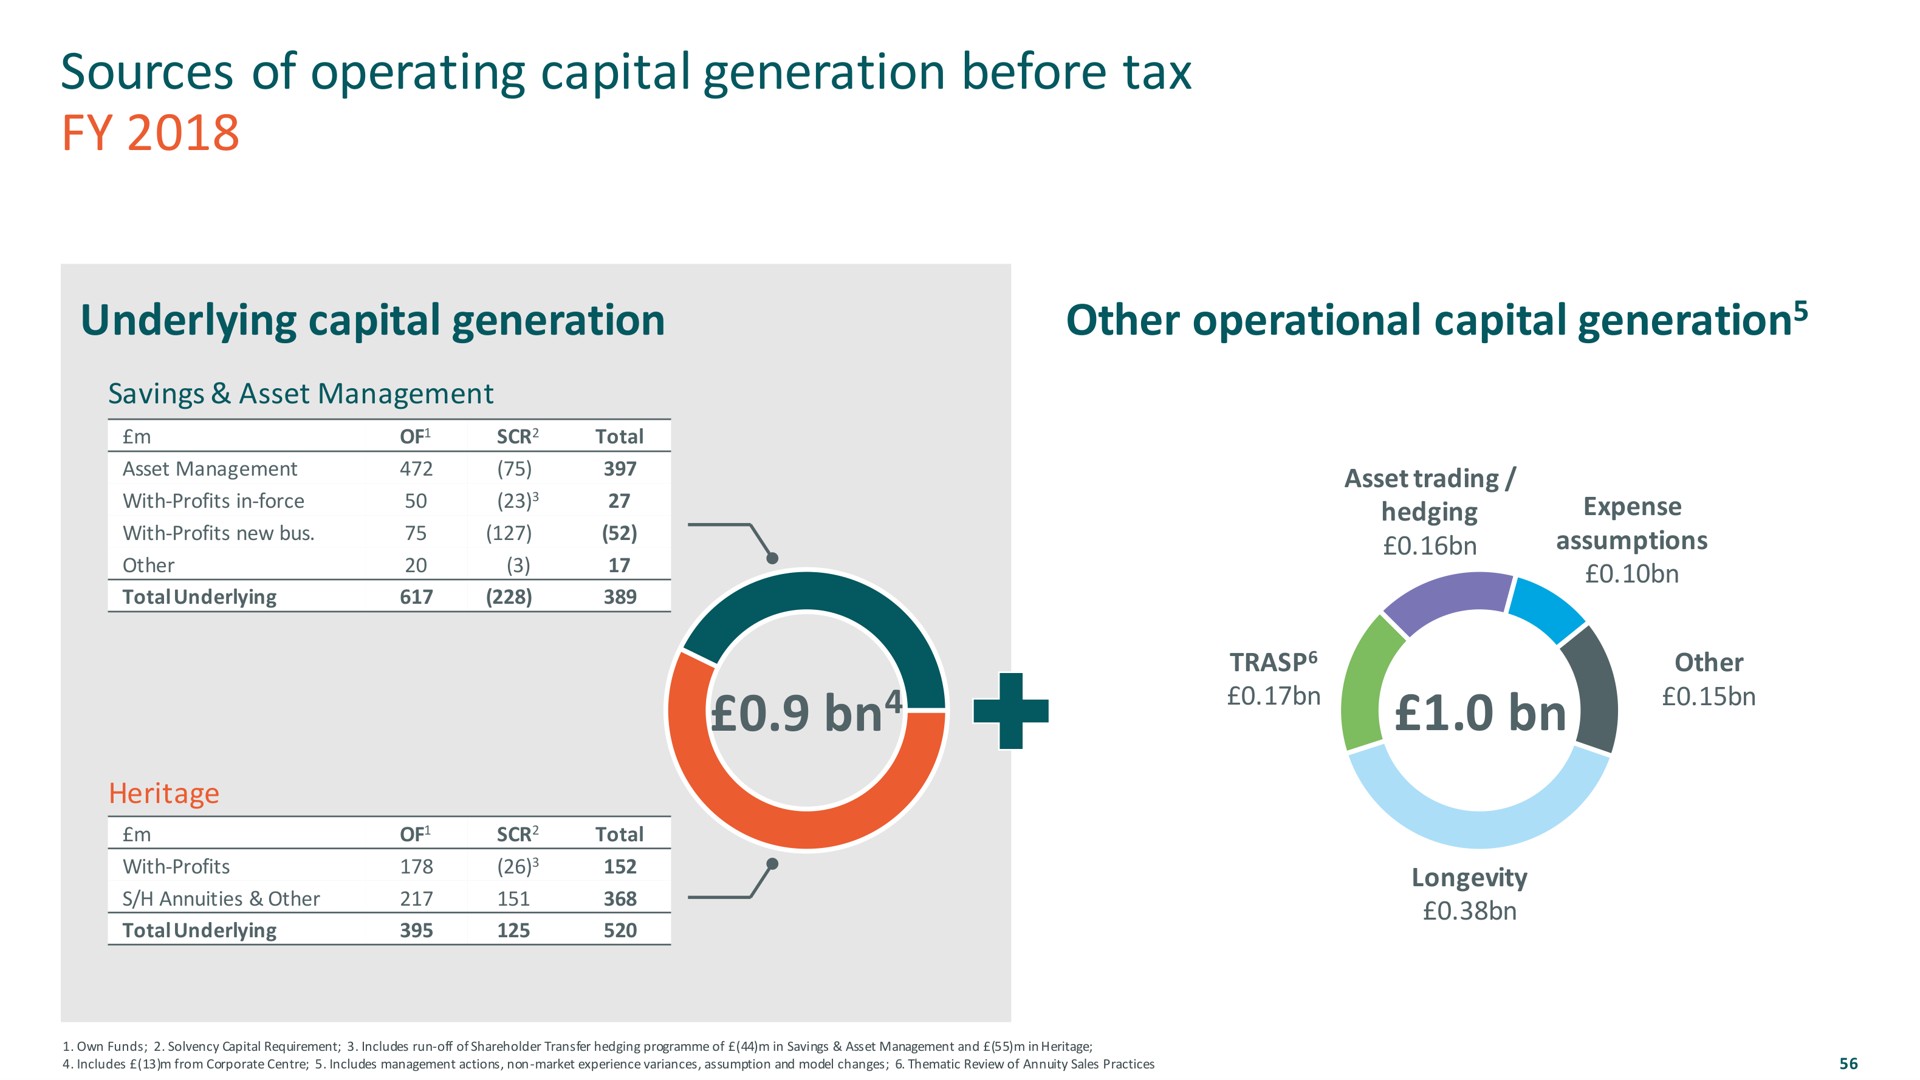 sources of operating capital generation before tax | M&G